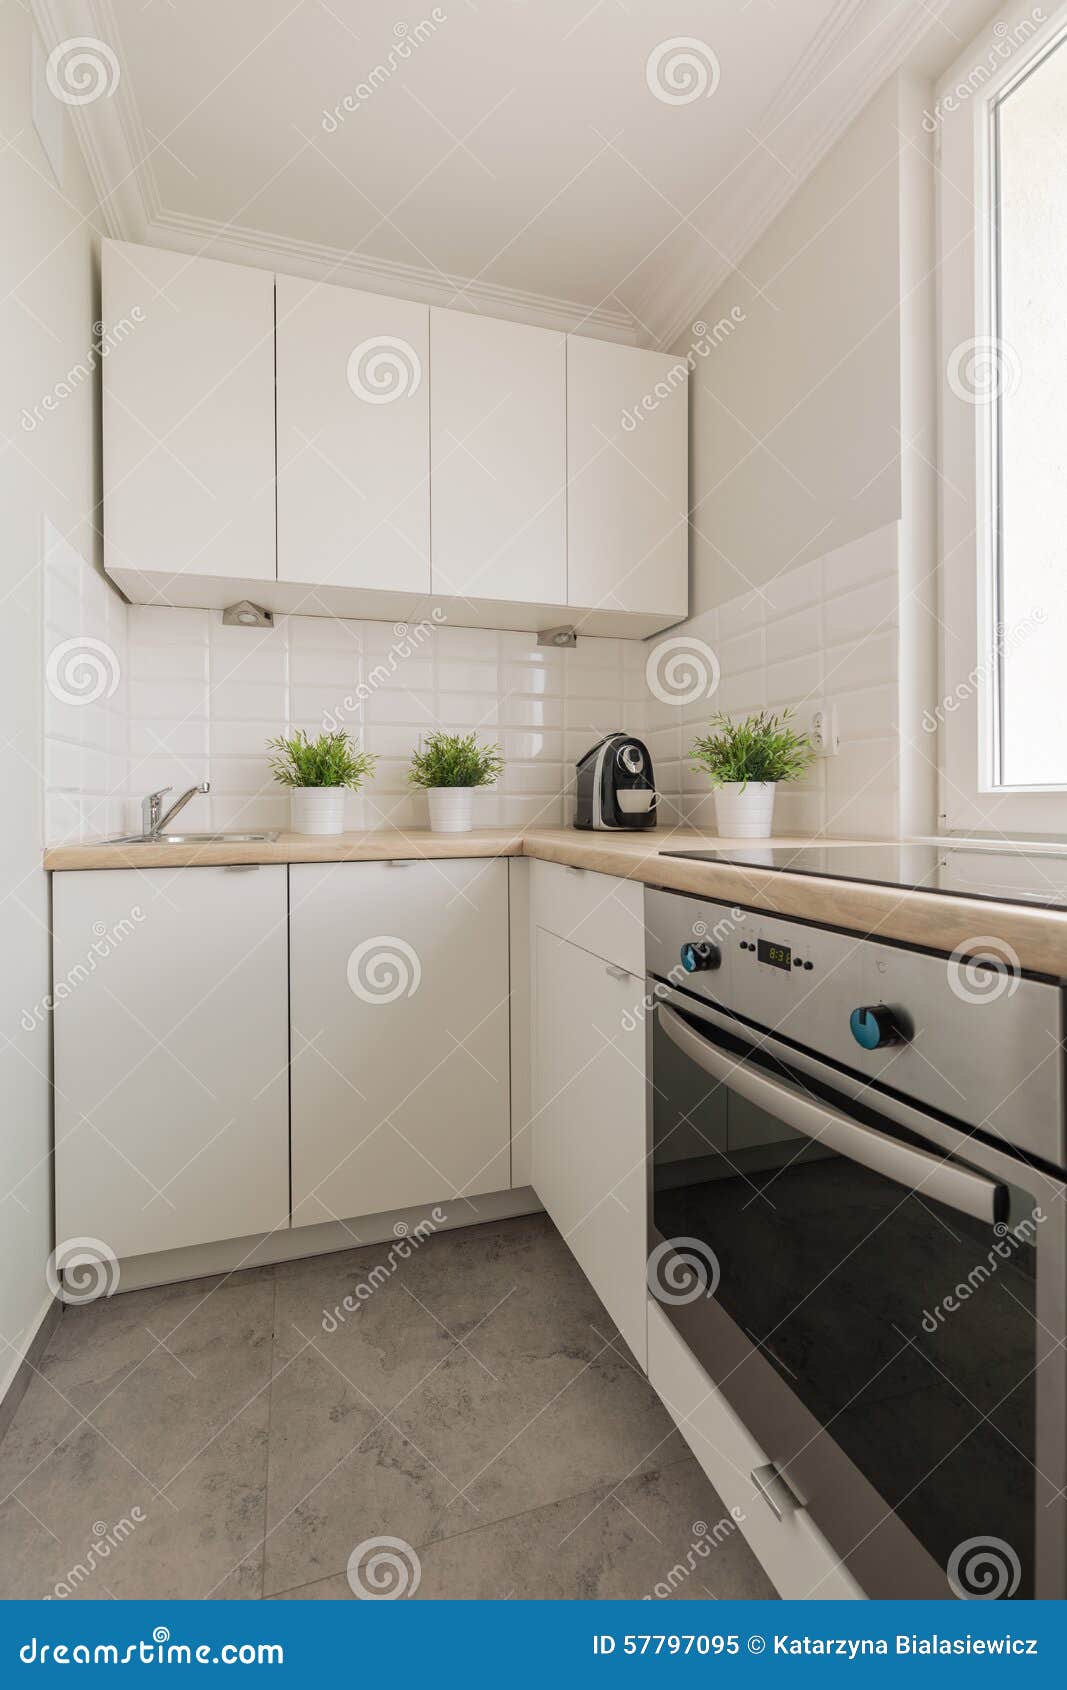 practical cupboards and oven